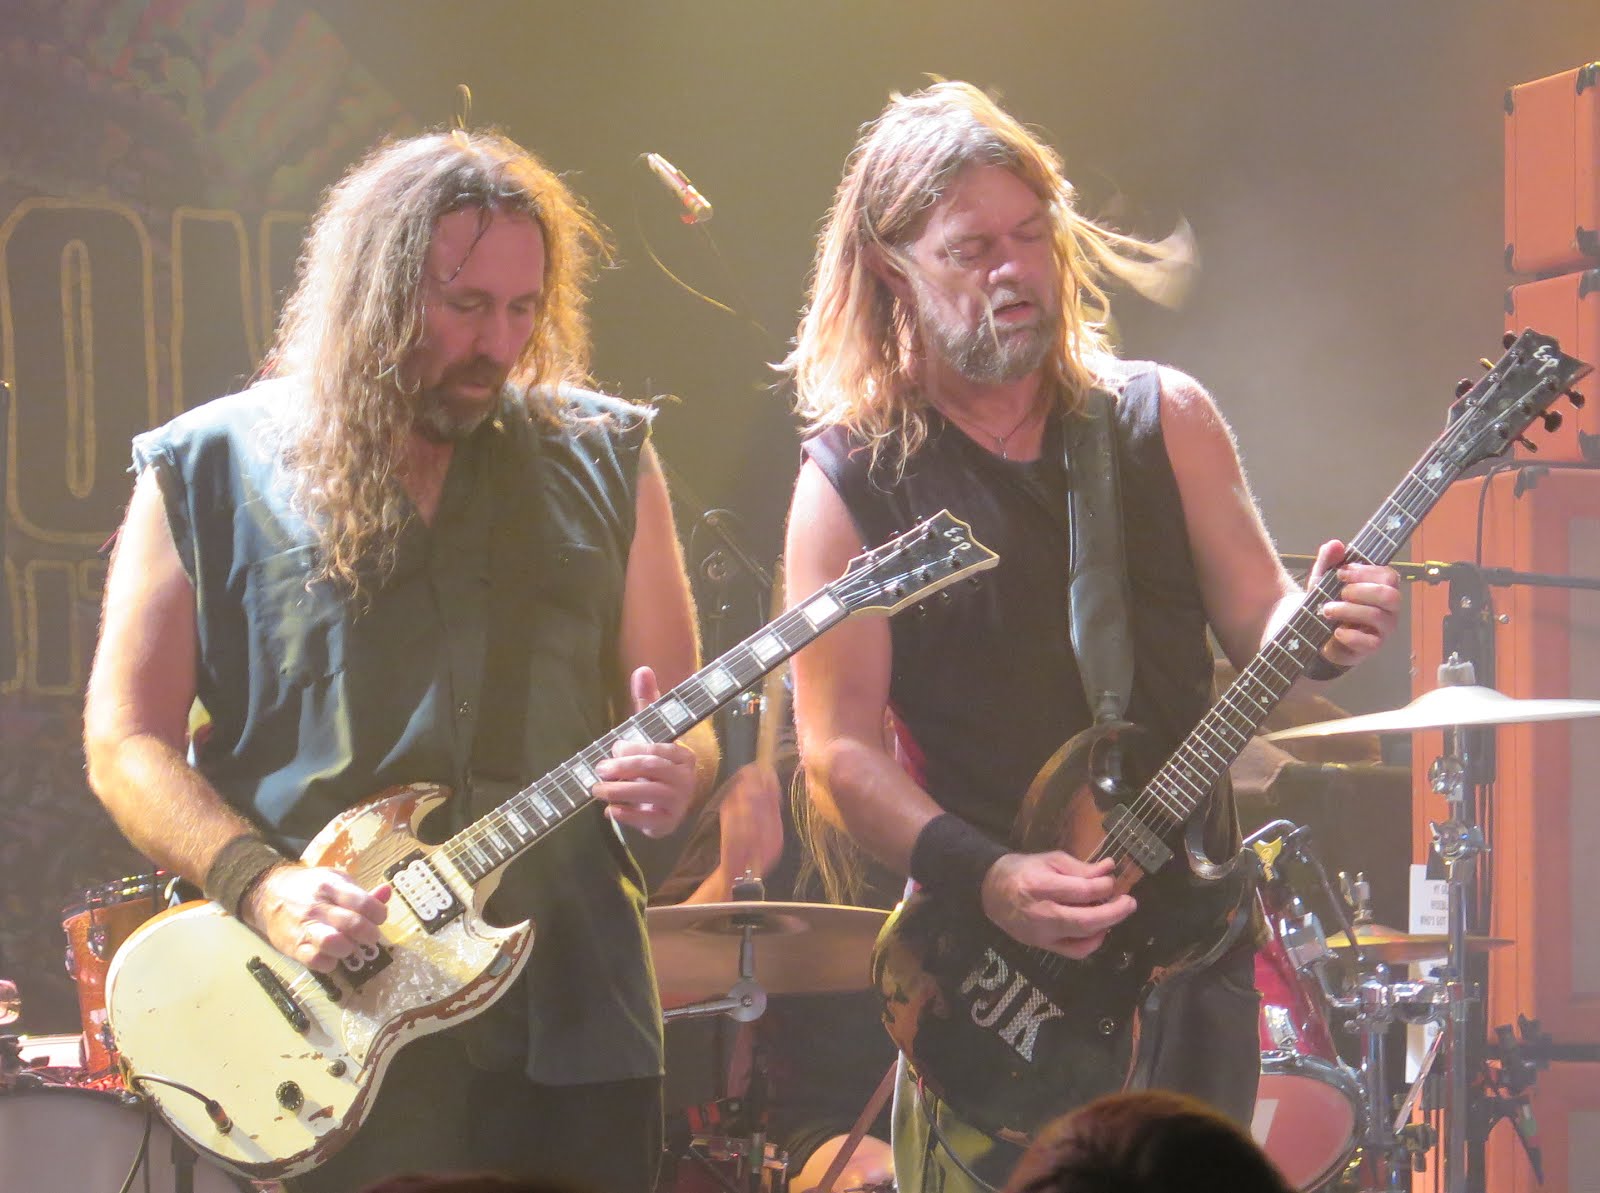 Glacially Musical: Concert Photos: Corrosion of Conformity at Pop's in Sauget IL ...